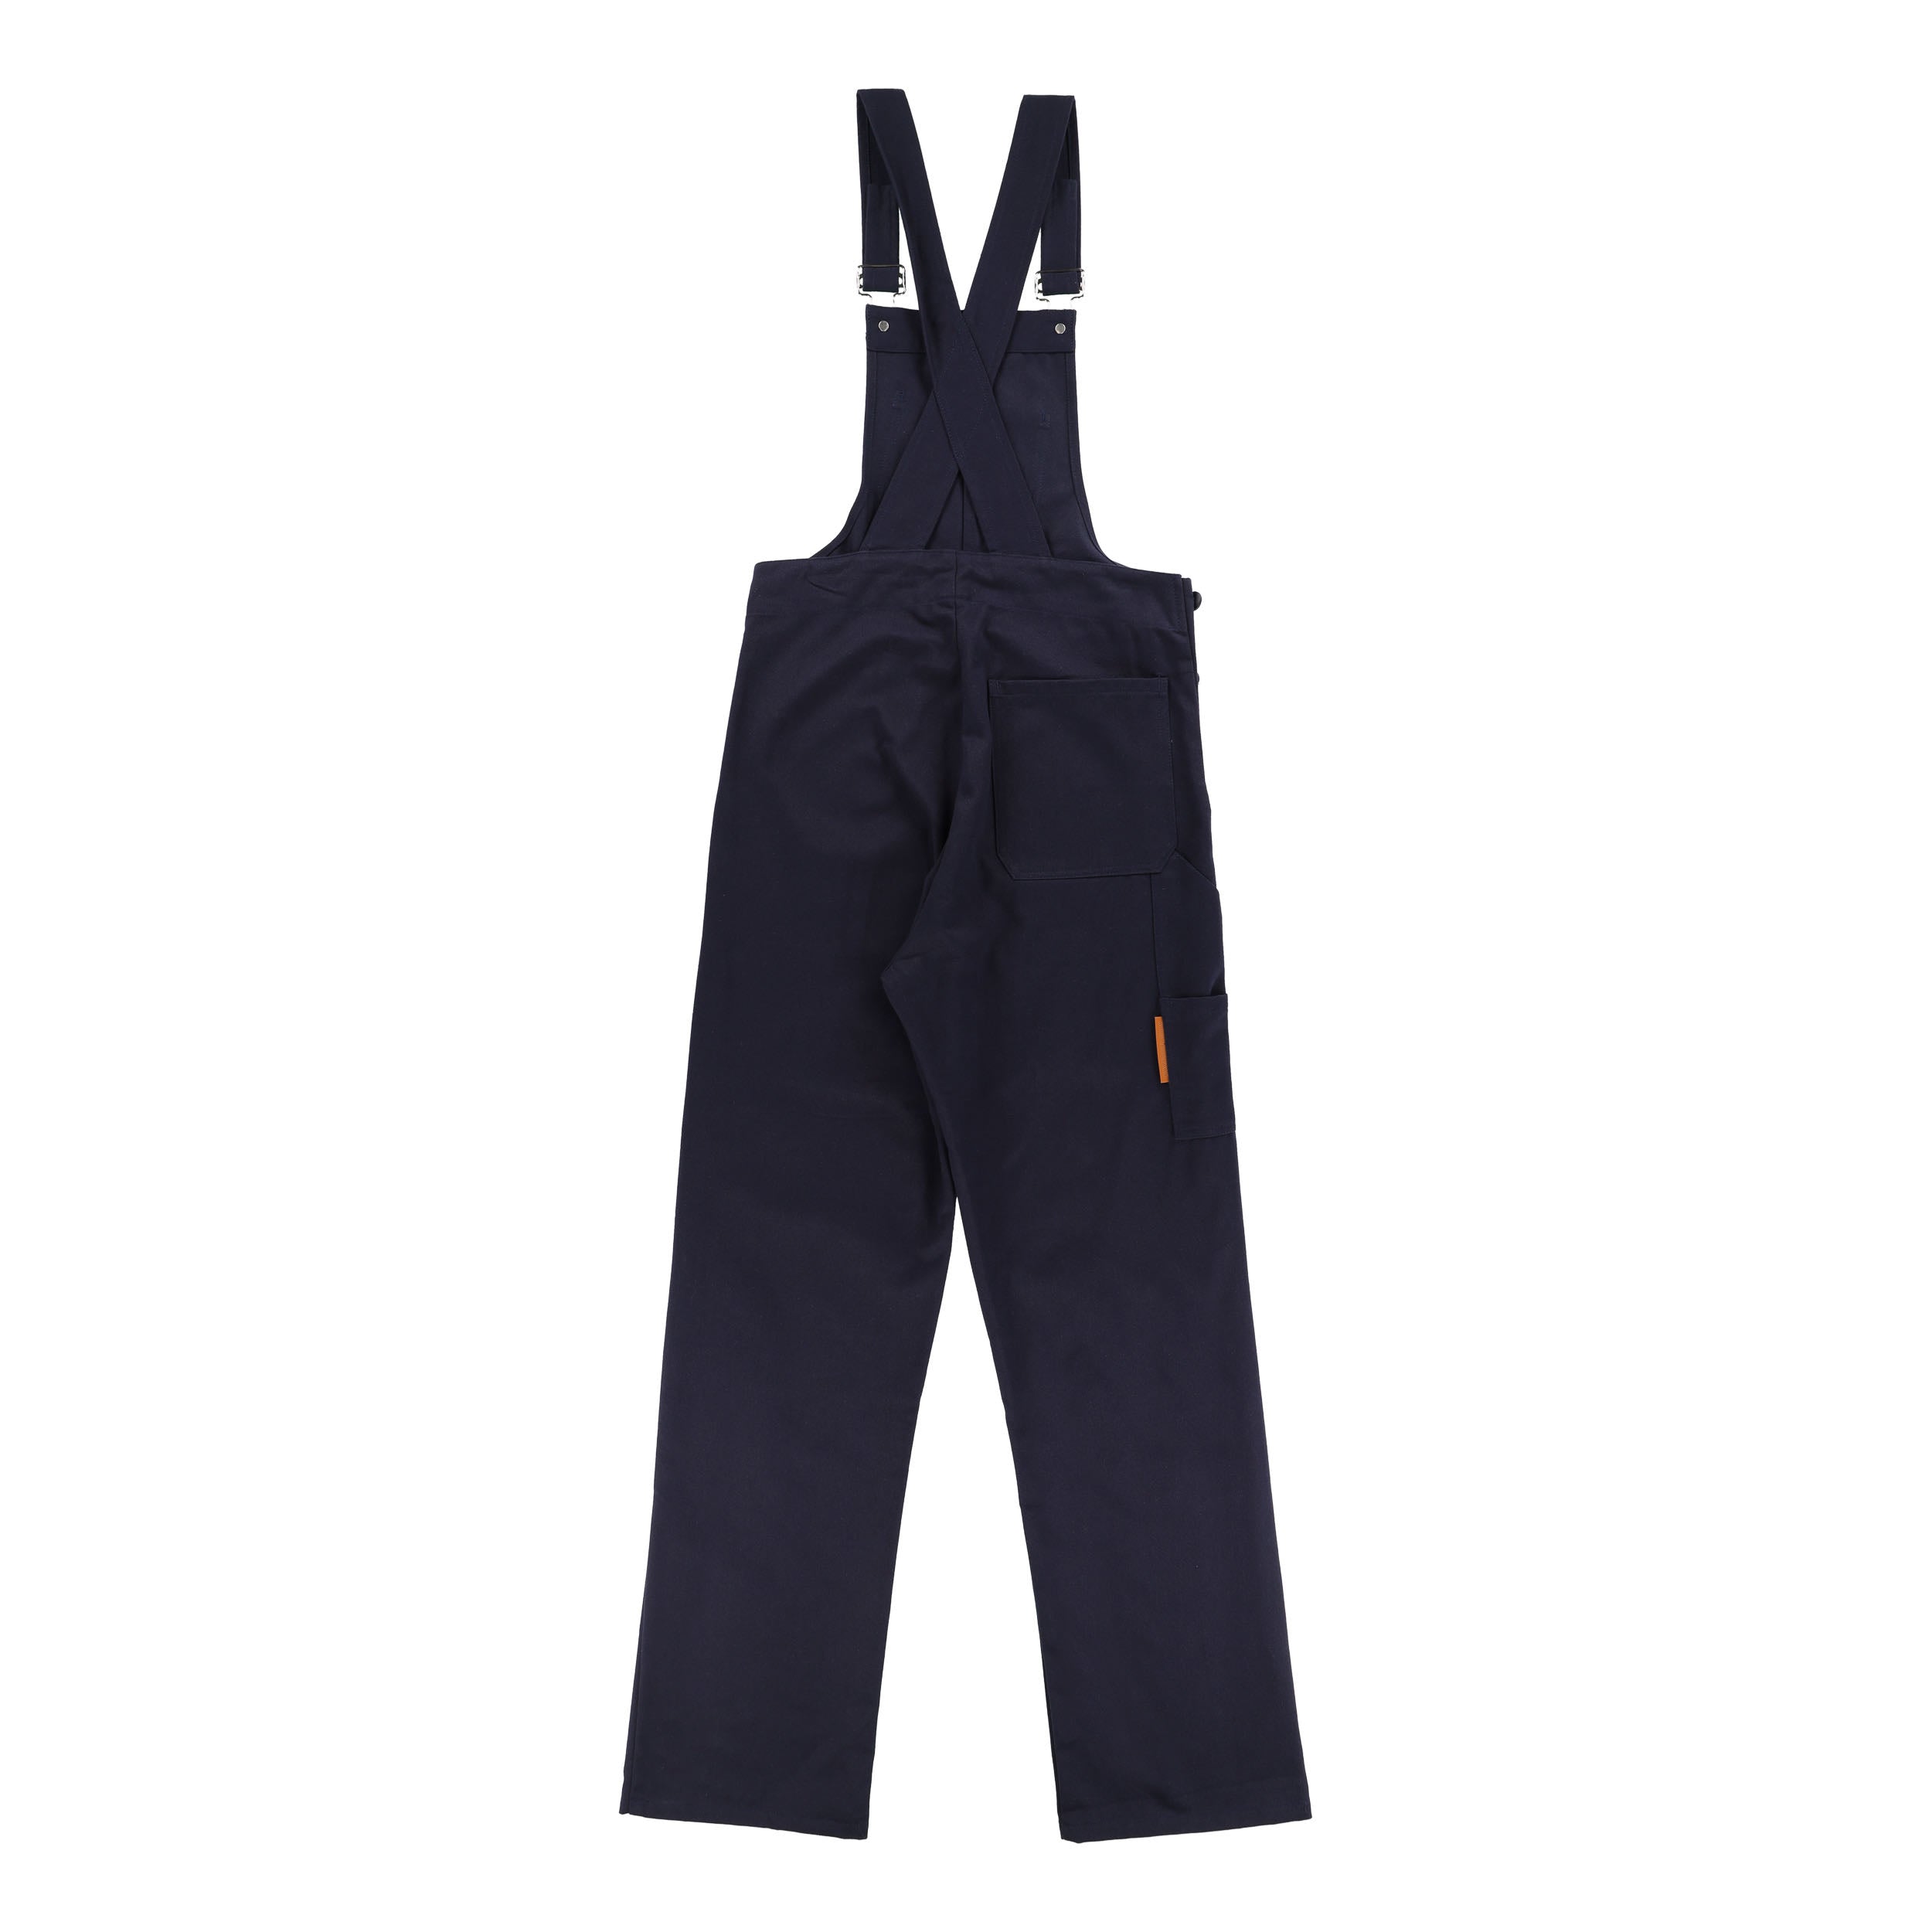 Back of the navy Carrier Company full length Men's Dungarees